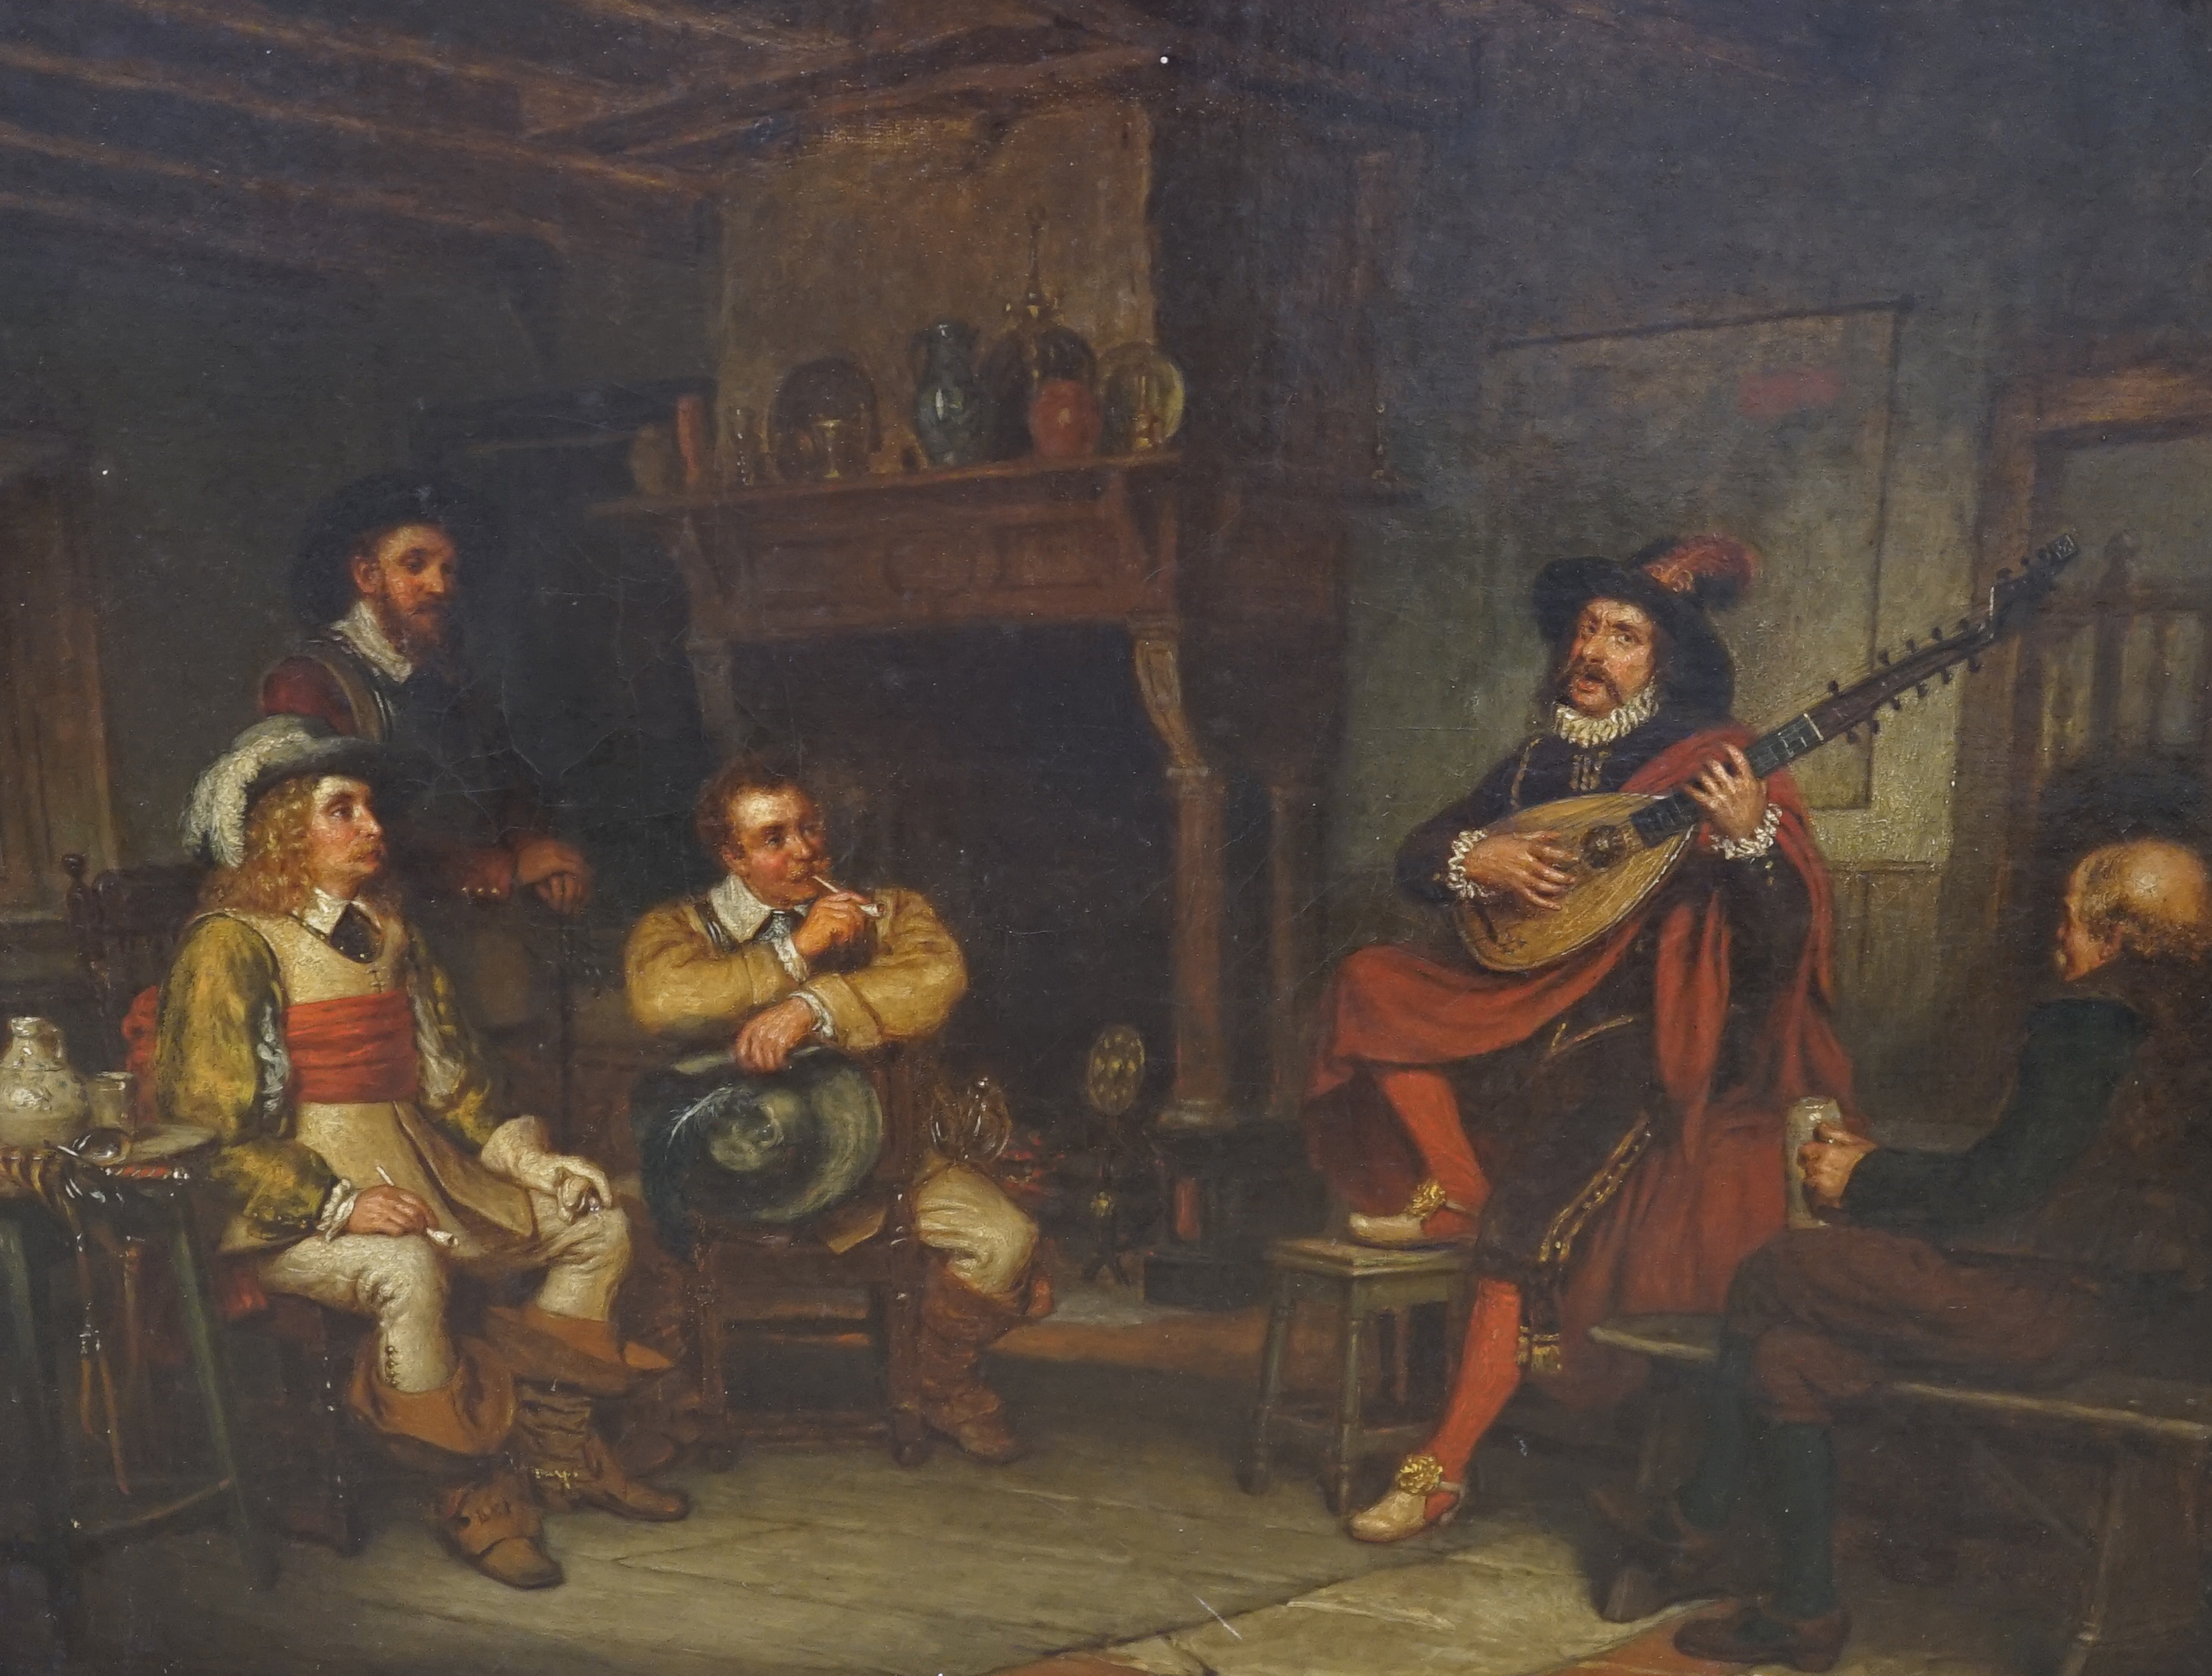 John Watkins Chapman (1853-1903), oil on canvas, 'The Strolling Minstrels' signed and indistinctly dated, possibly 1880, 37 x 47cm, ornate gilt framed. Condition - fair, craquelure and some minor scratches